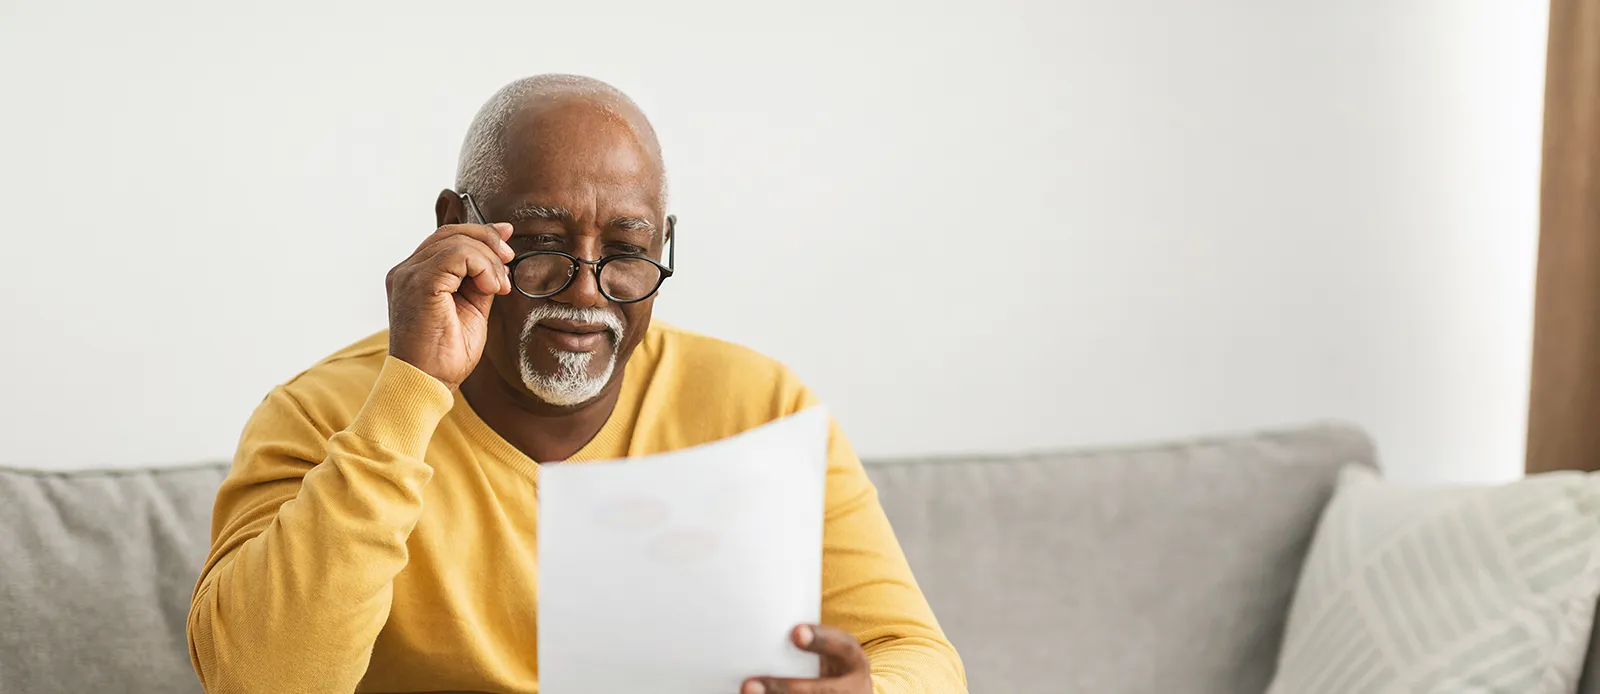 Senior African American Male Working With Papers Wearing Eyeglasses Sitting On Couch At Home.